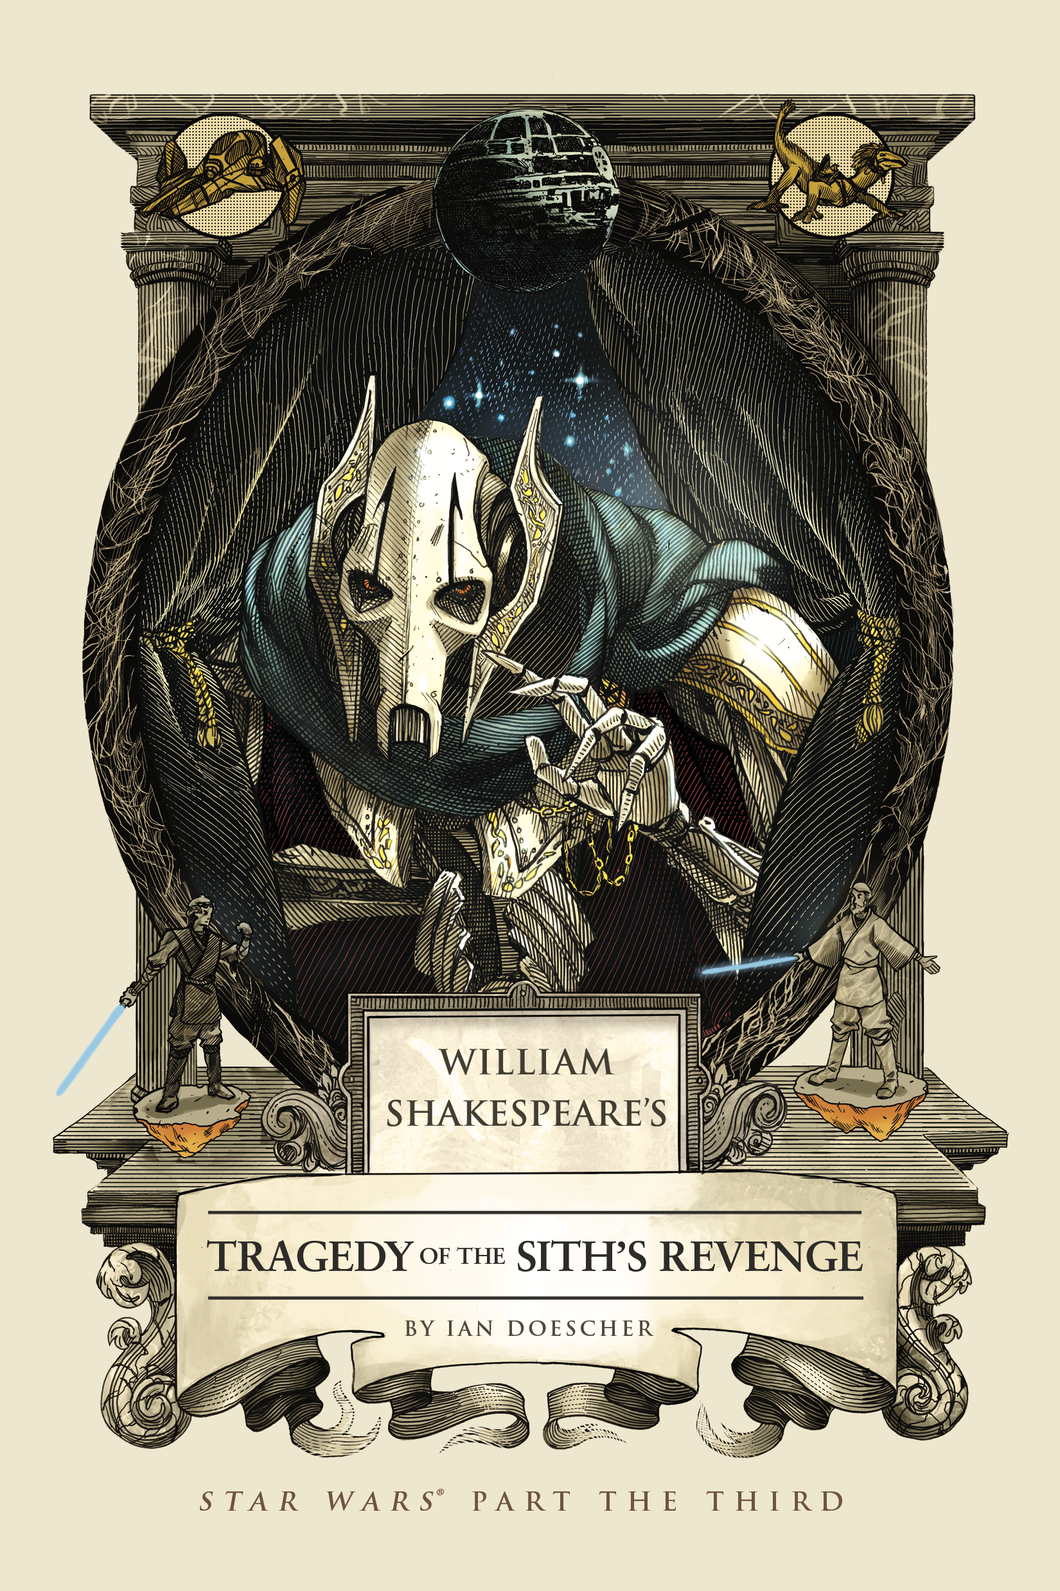 William Shakespeare: Star Wars Part the 3rd - Tragedy of the Siths Revenge - RH